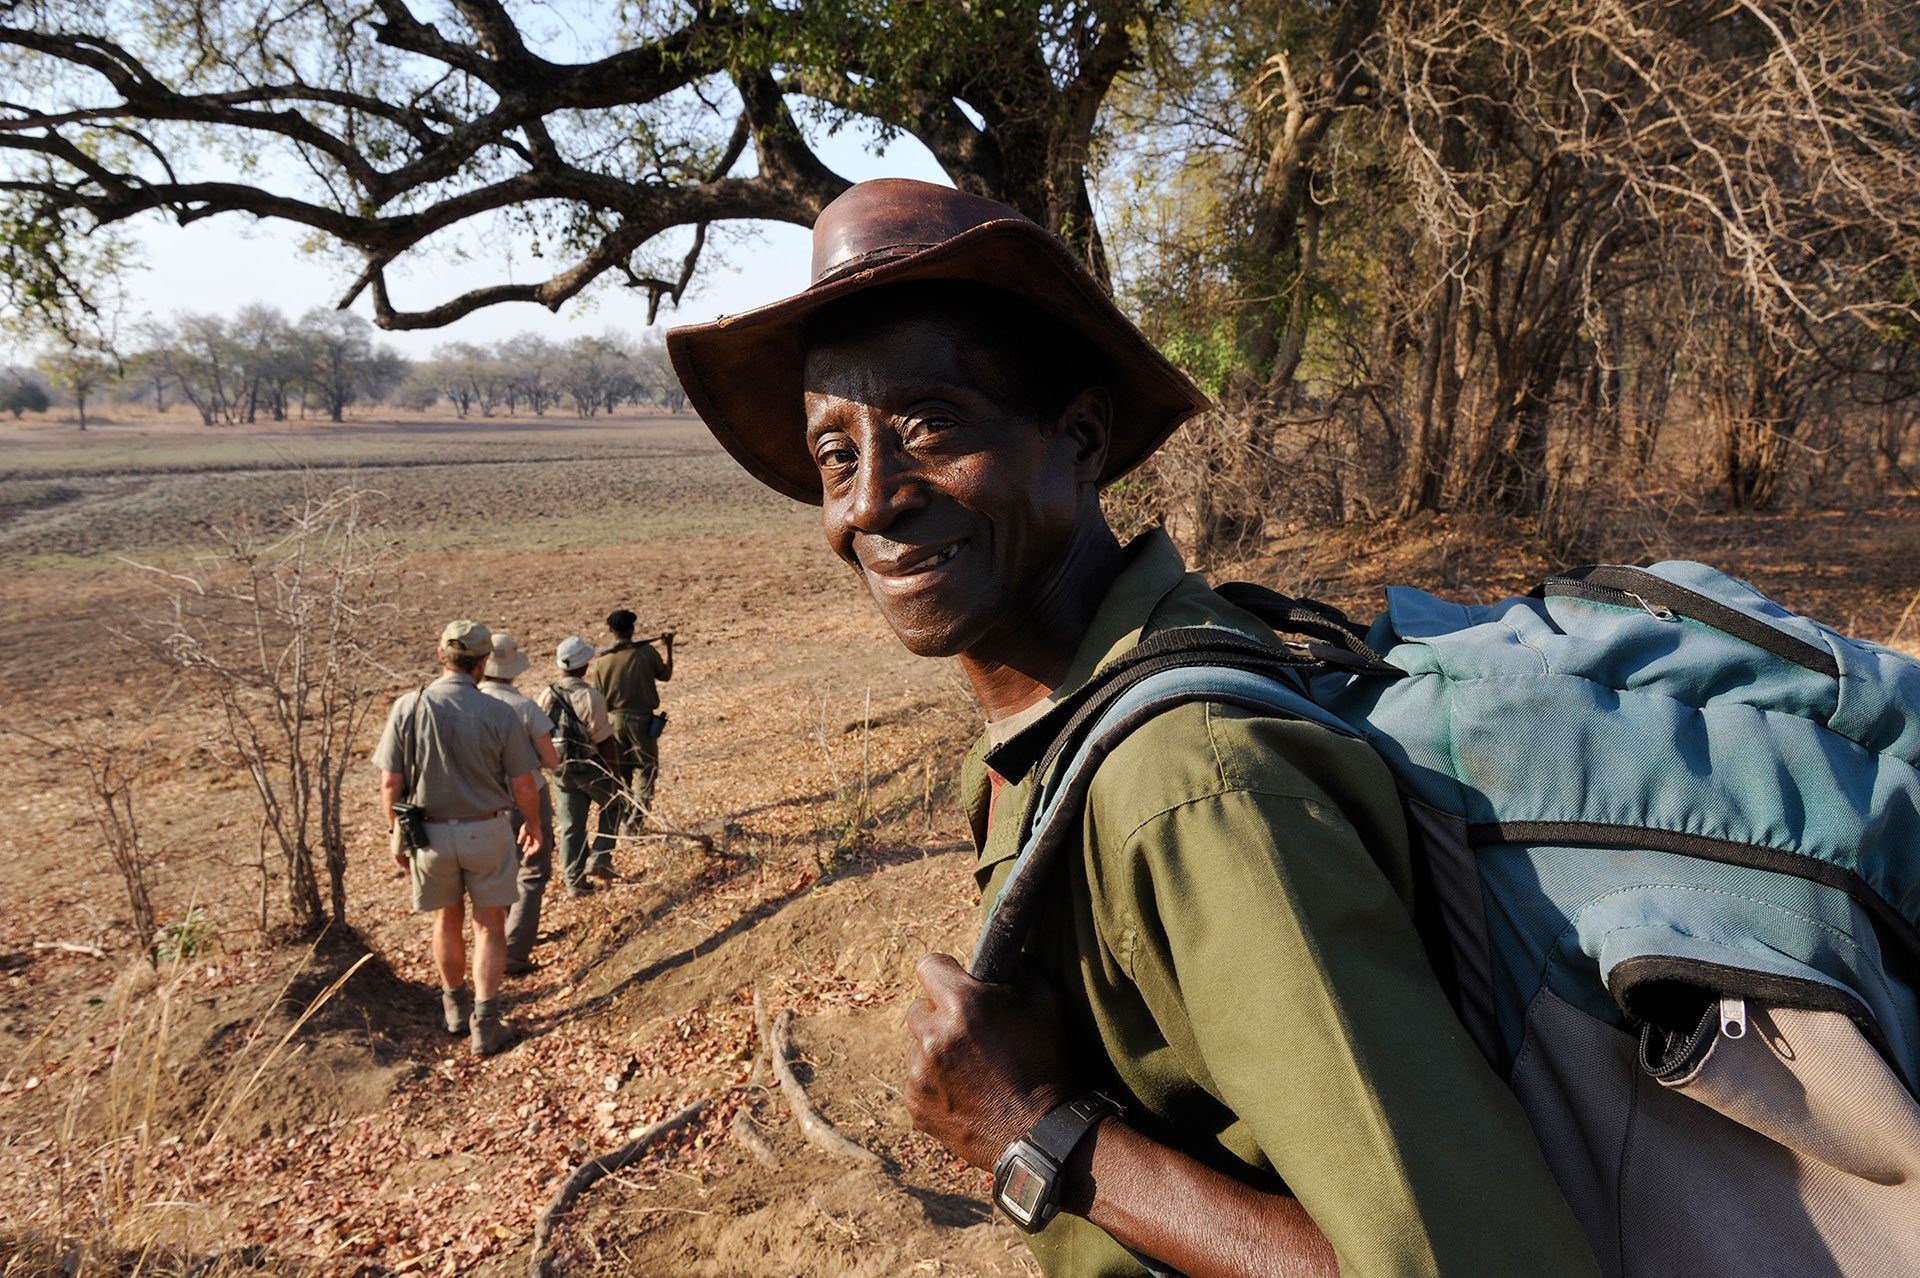 How To Do An Old School Safari, Established Camp Guides